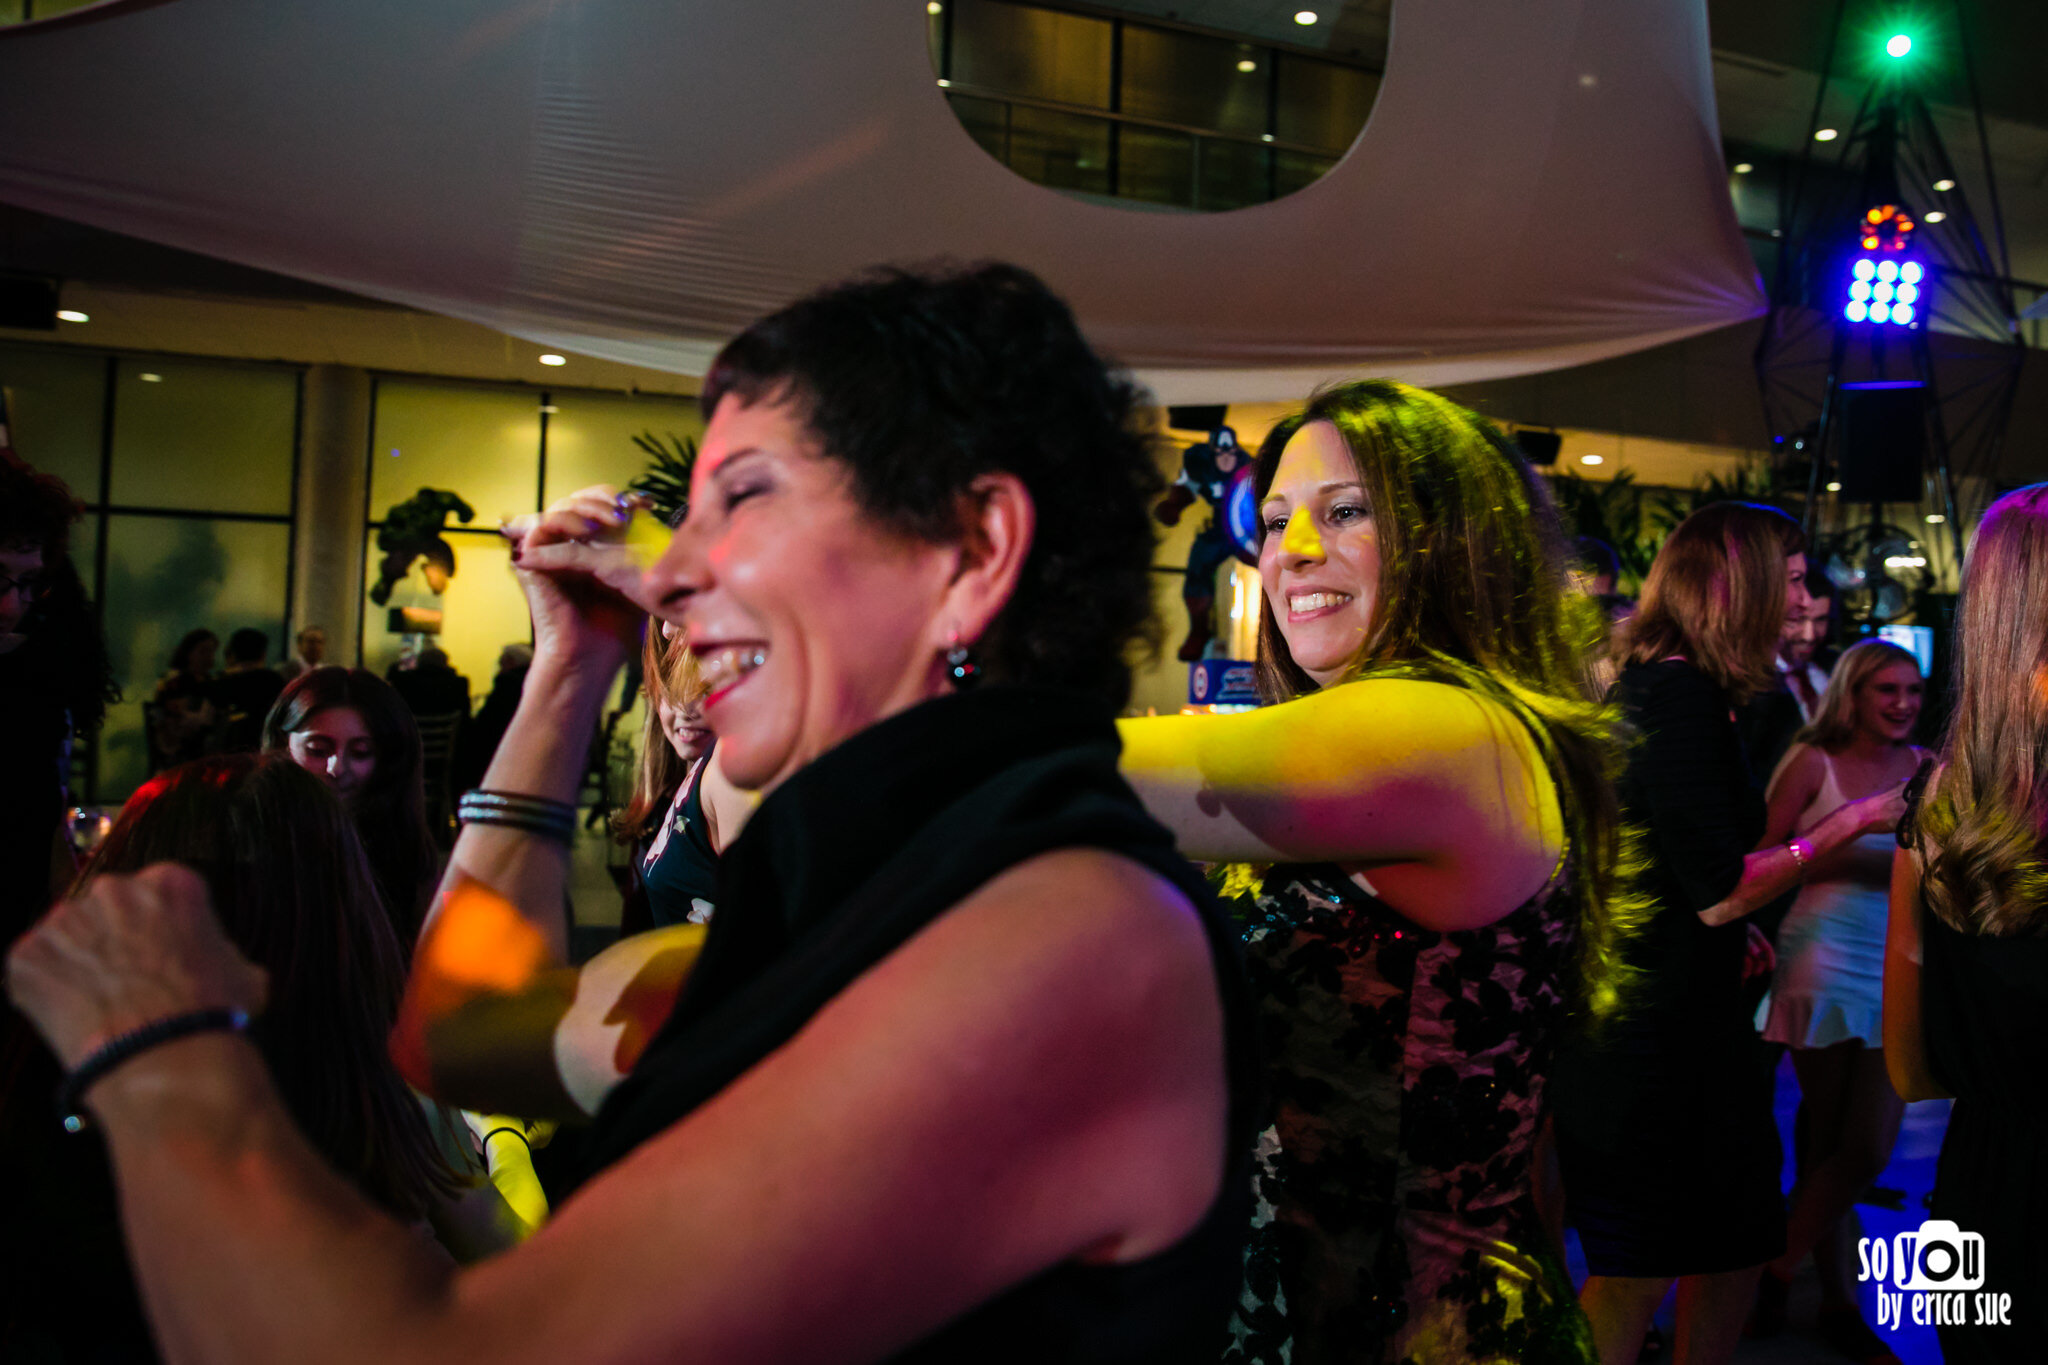 57-so-you-by-erica-sue-bar-mitzvah-photographer-boca-pavilion-grille-6101.JPG